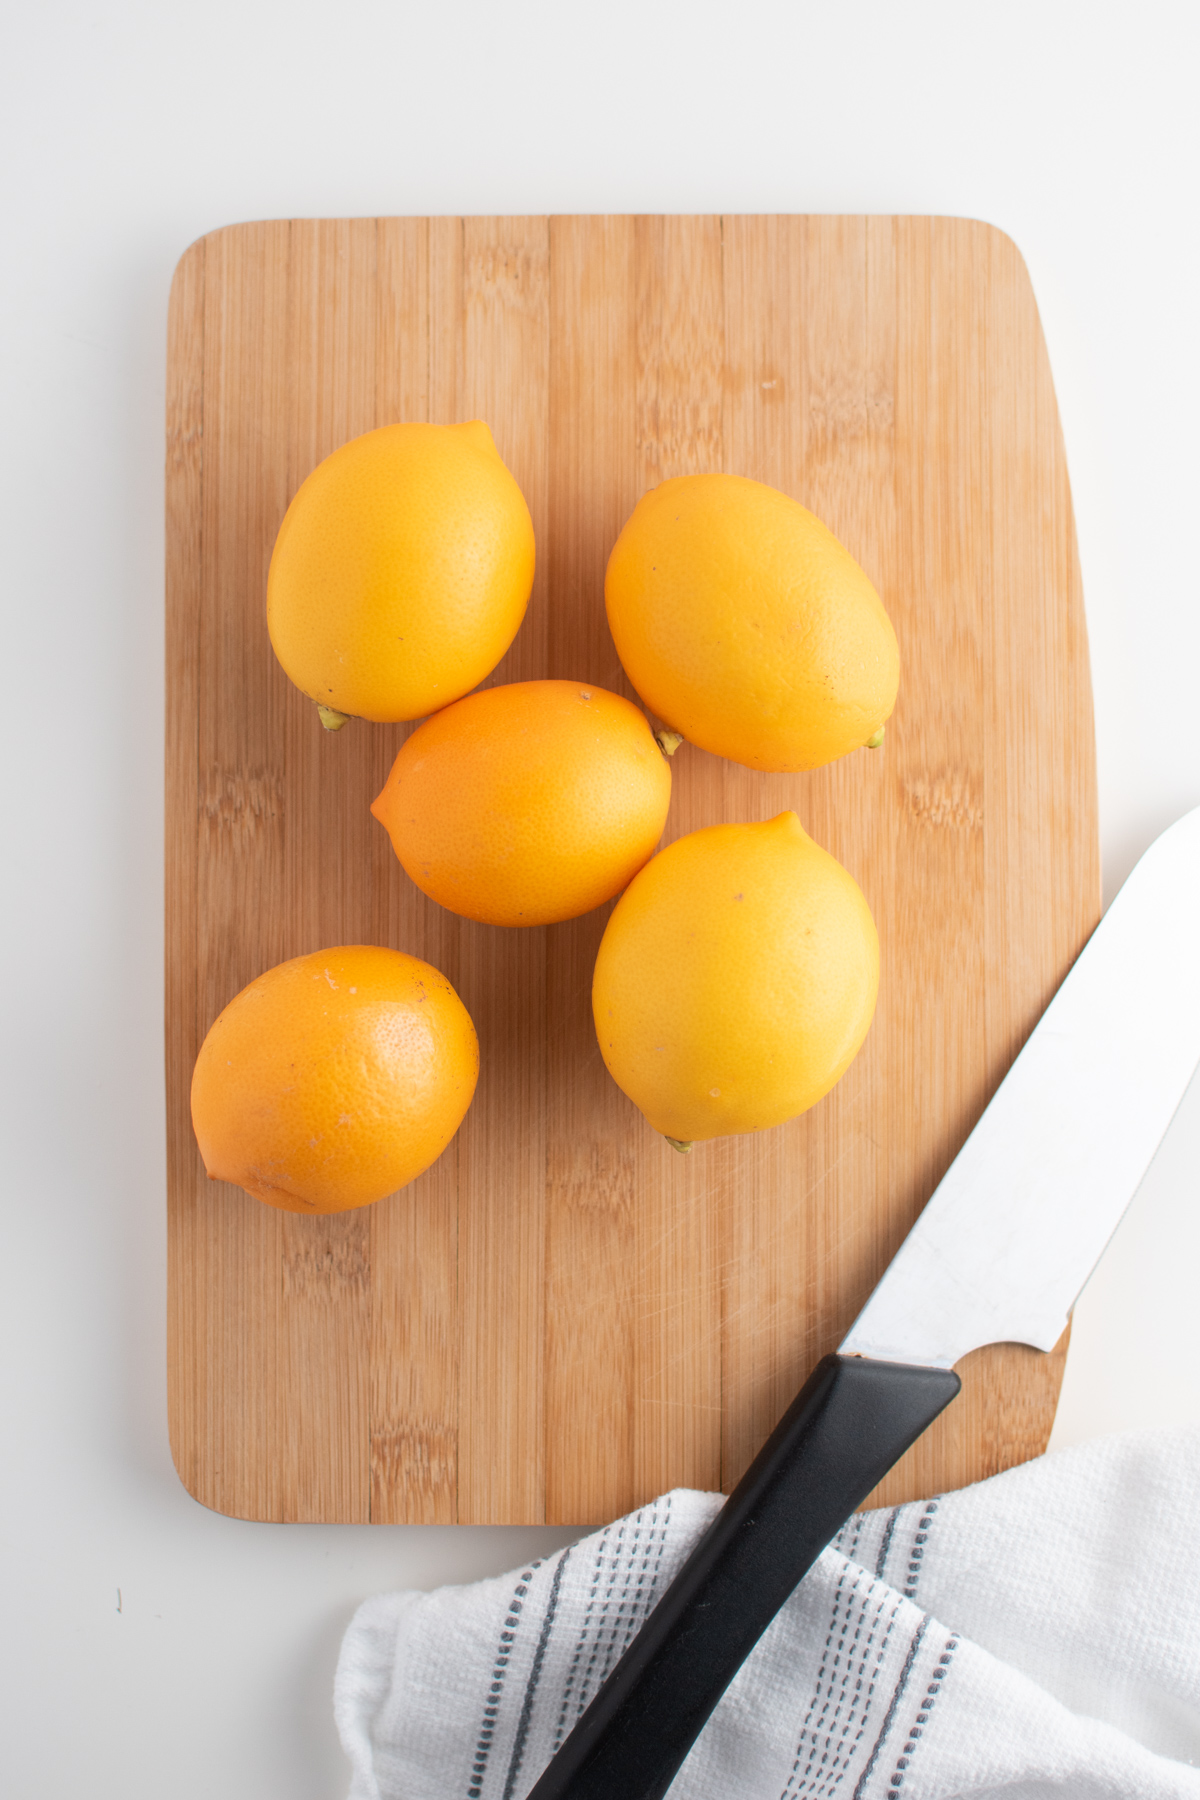 Five Meyer lemons on wooden cutting board with kitchen knife and towel.